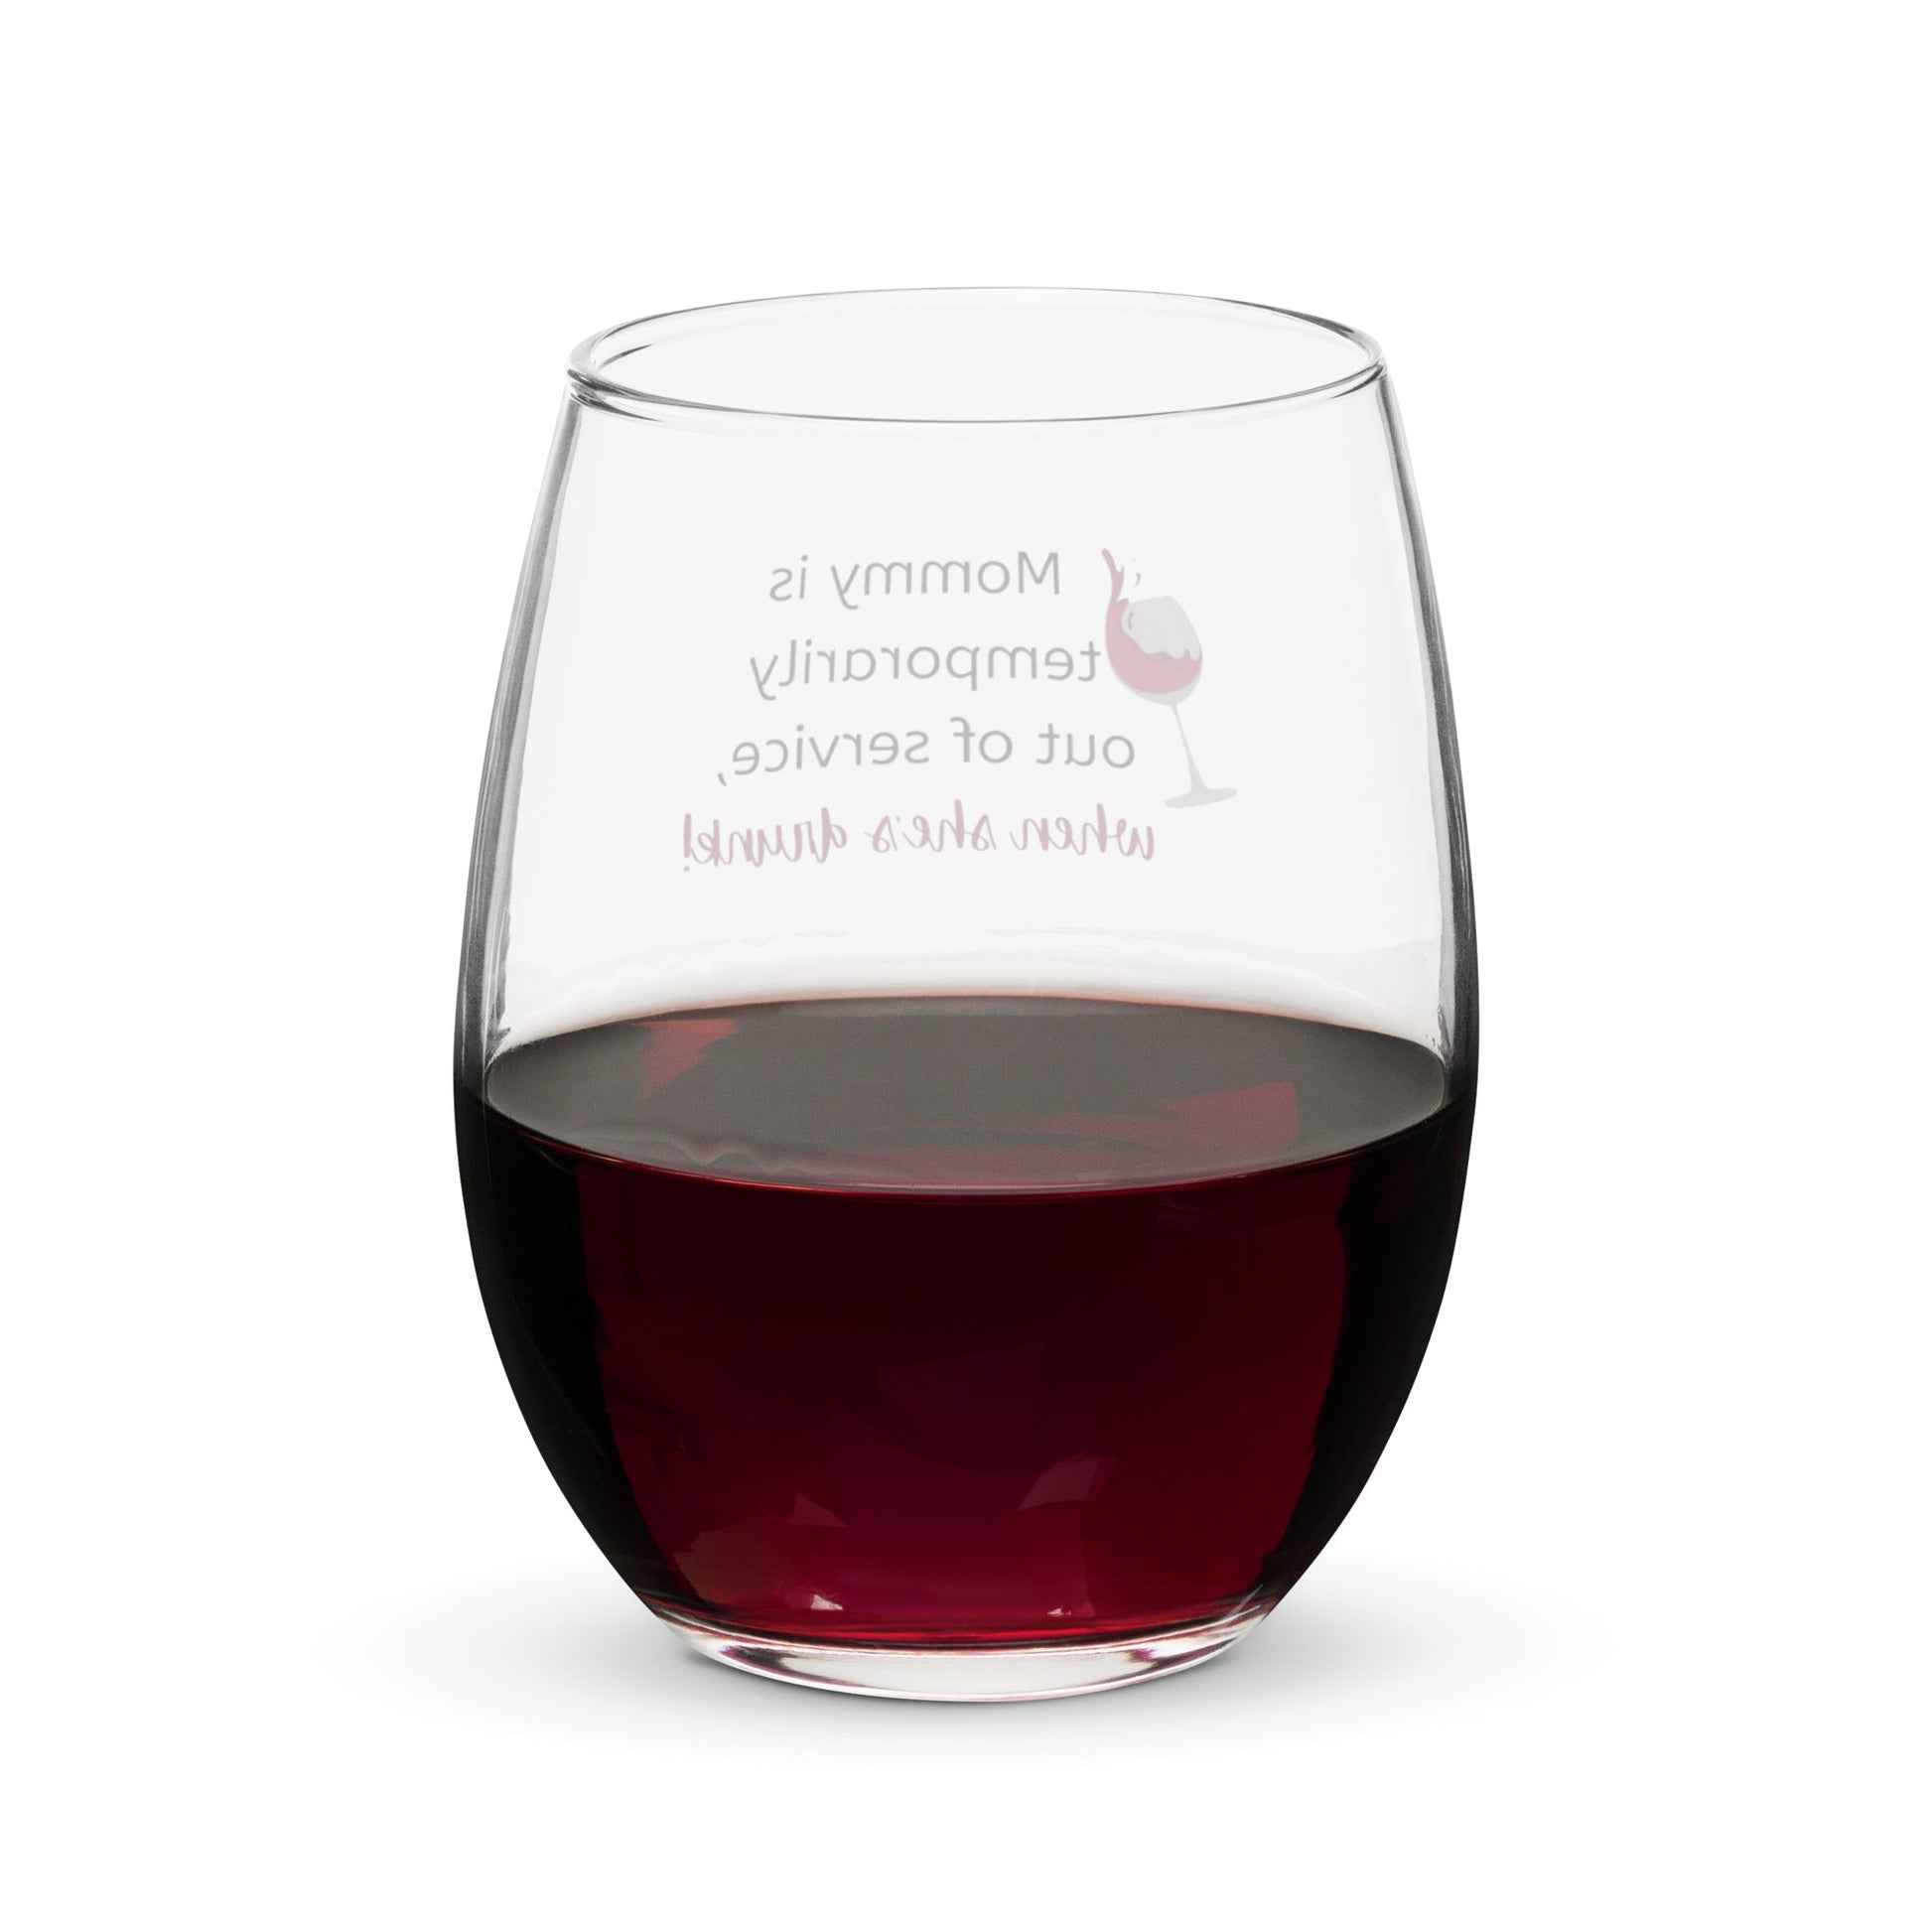 Mom’s Out Wine Glass